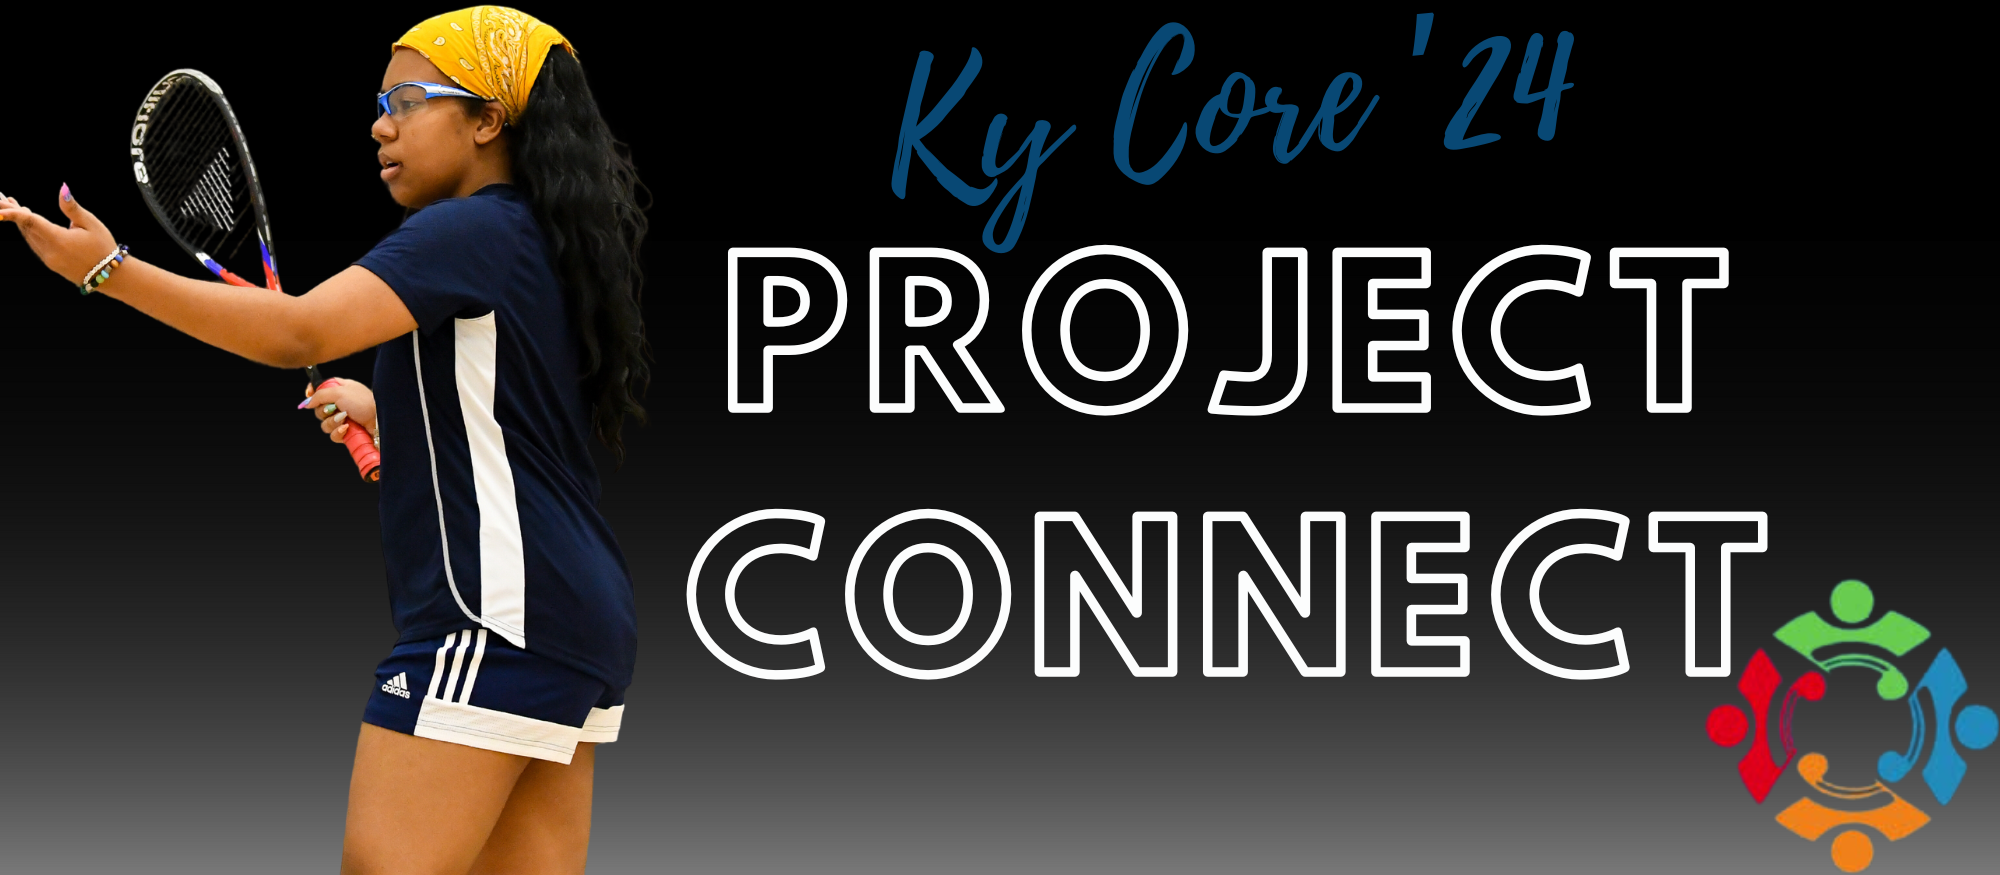 Squash player Ky Core '24 was quick to volunteer with ProjectConnect when it was launched a year ago by Mount Holyoke Counseling Services.